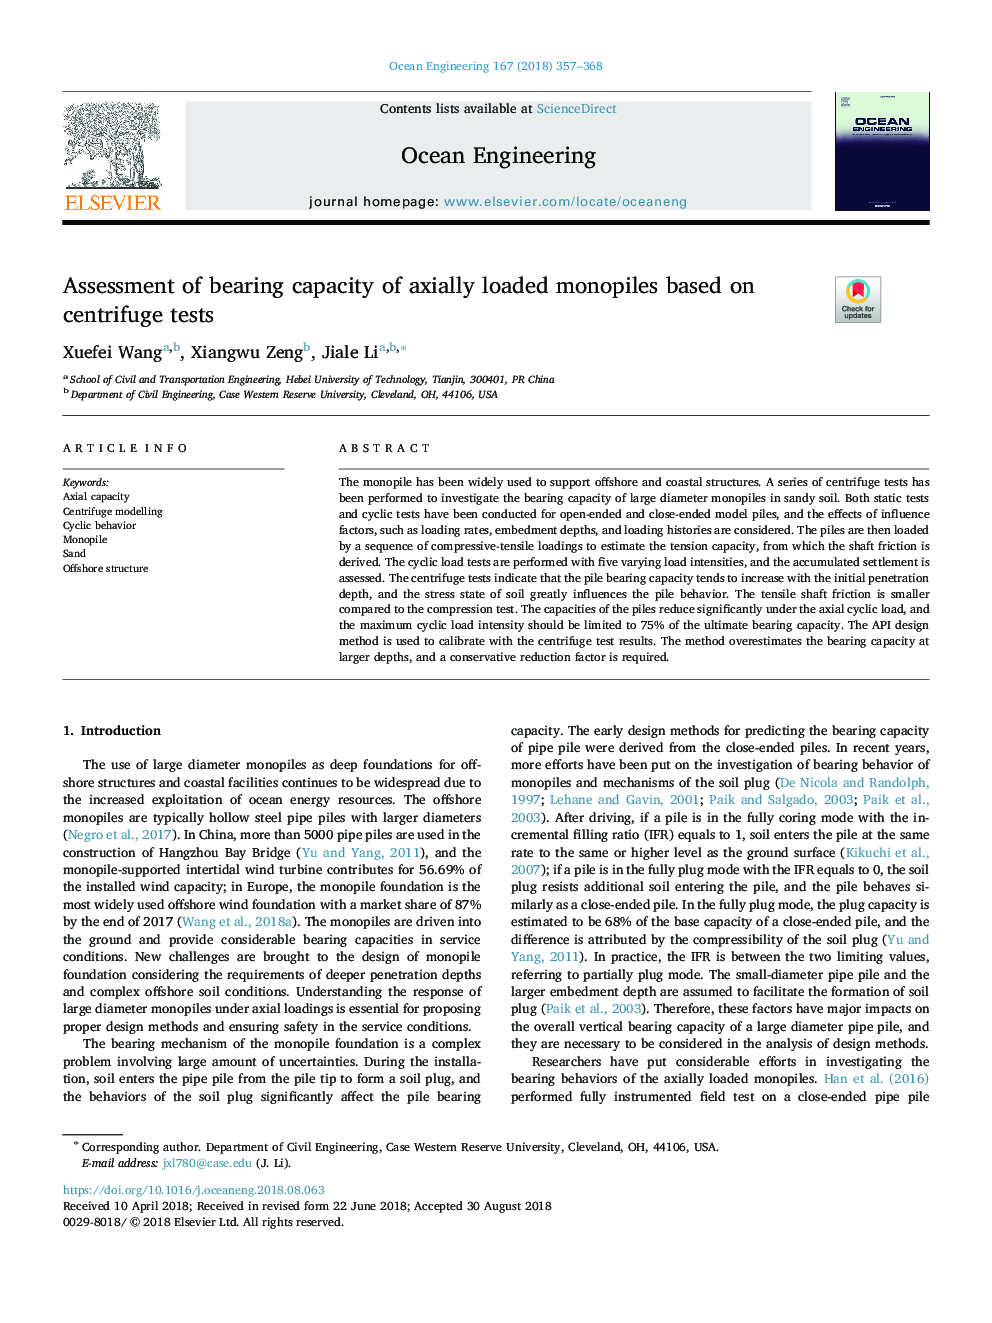 Assessment of bearing capacity of axially loaded monopiles based on centrifuge tests